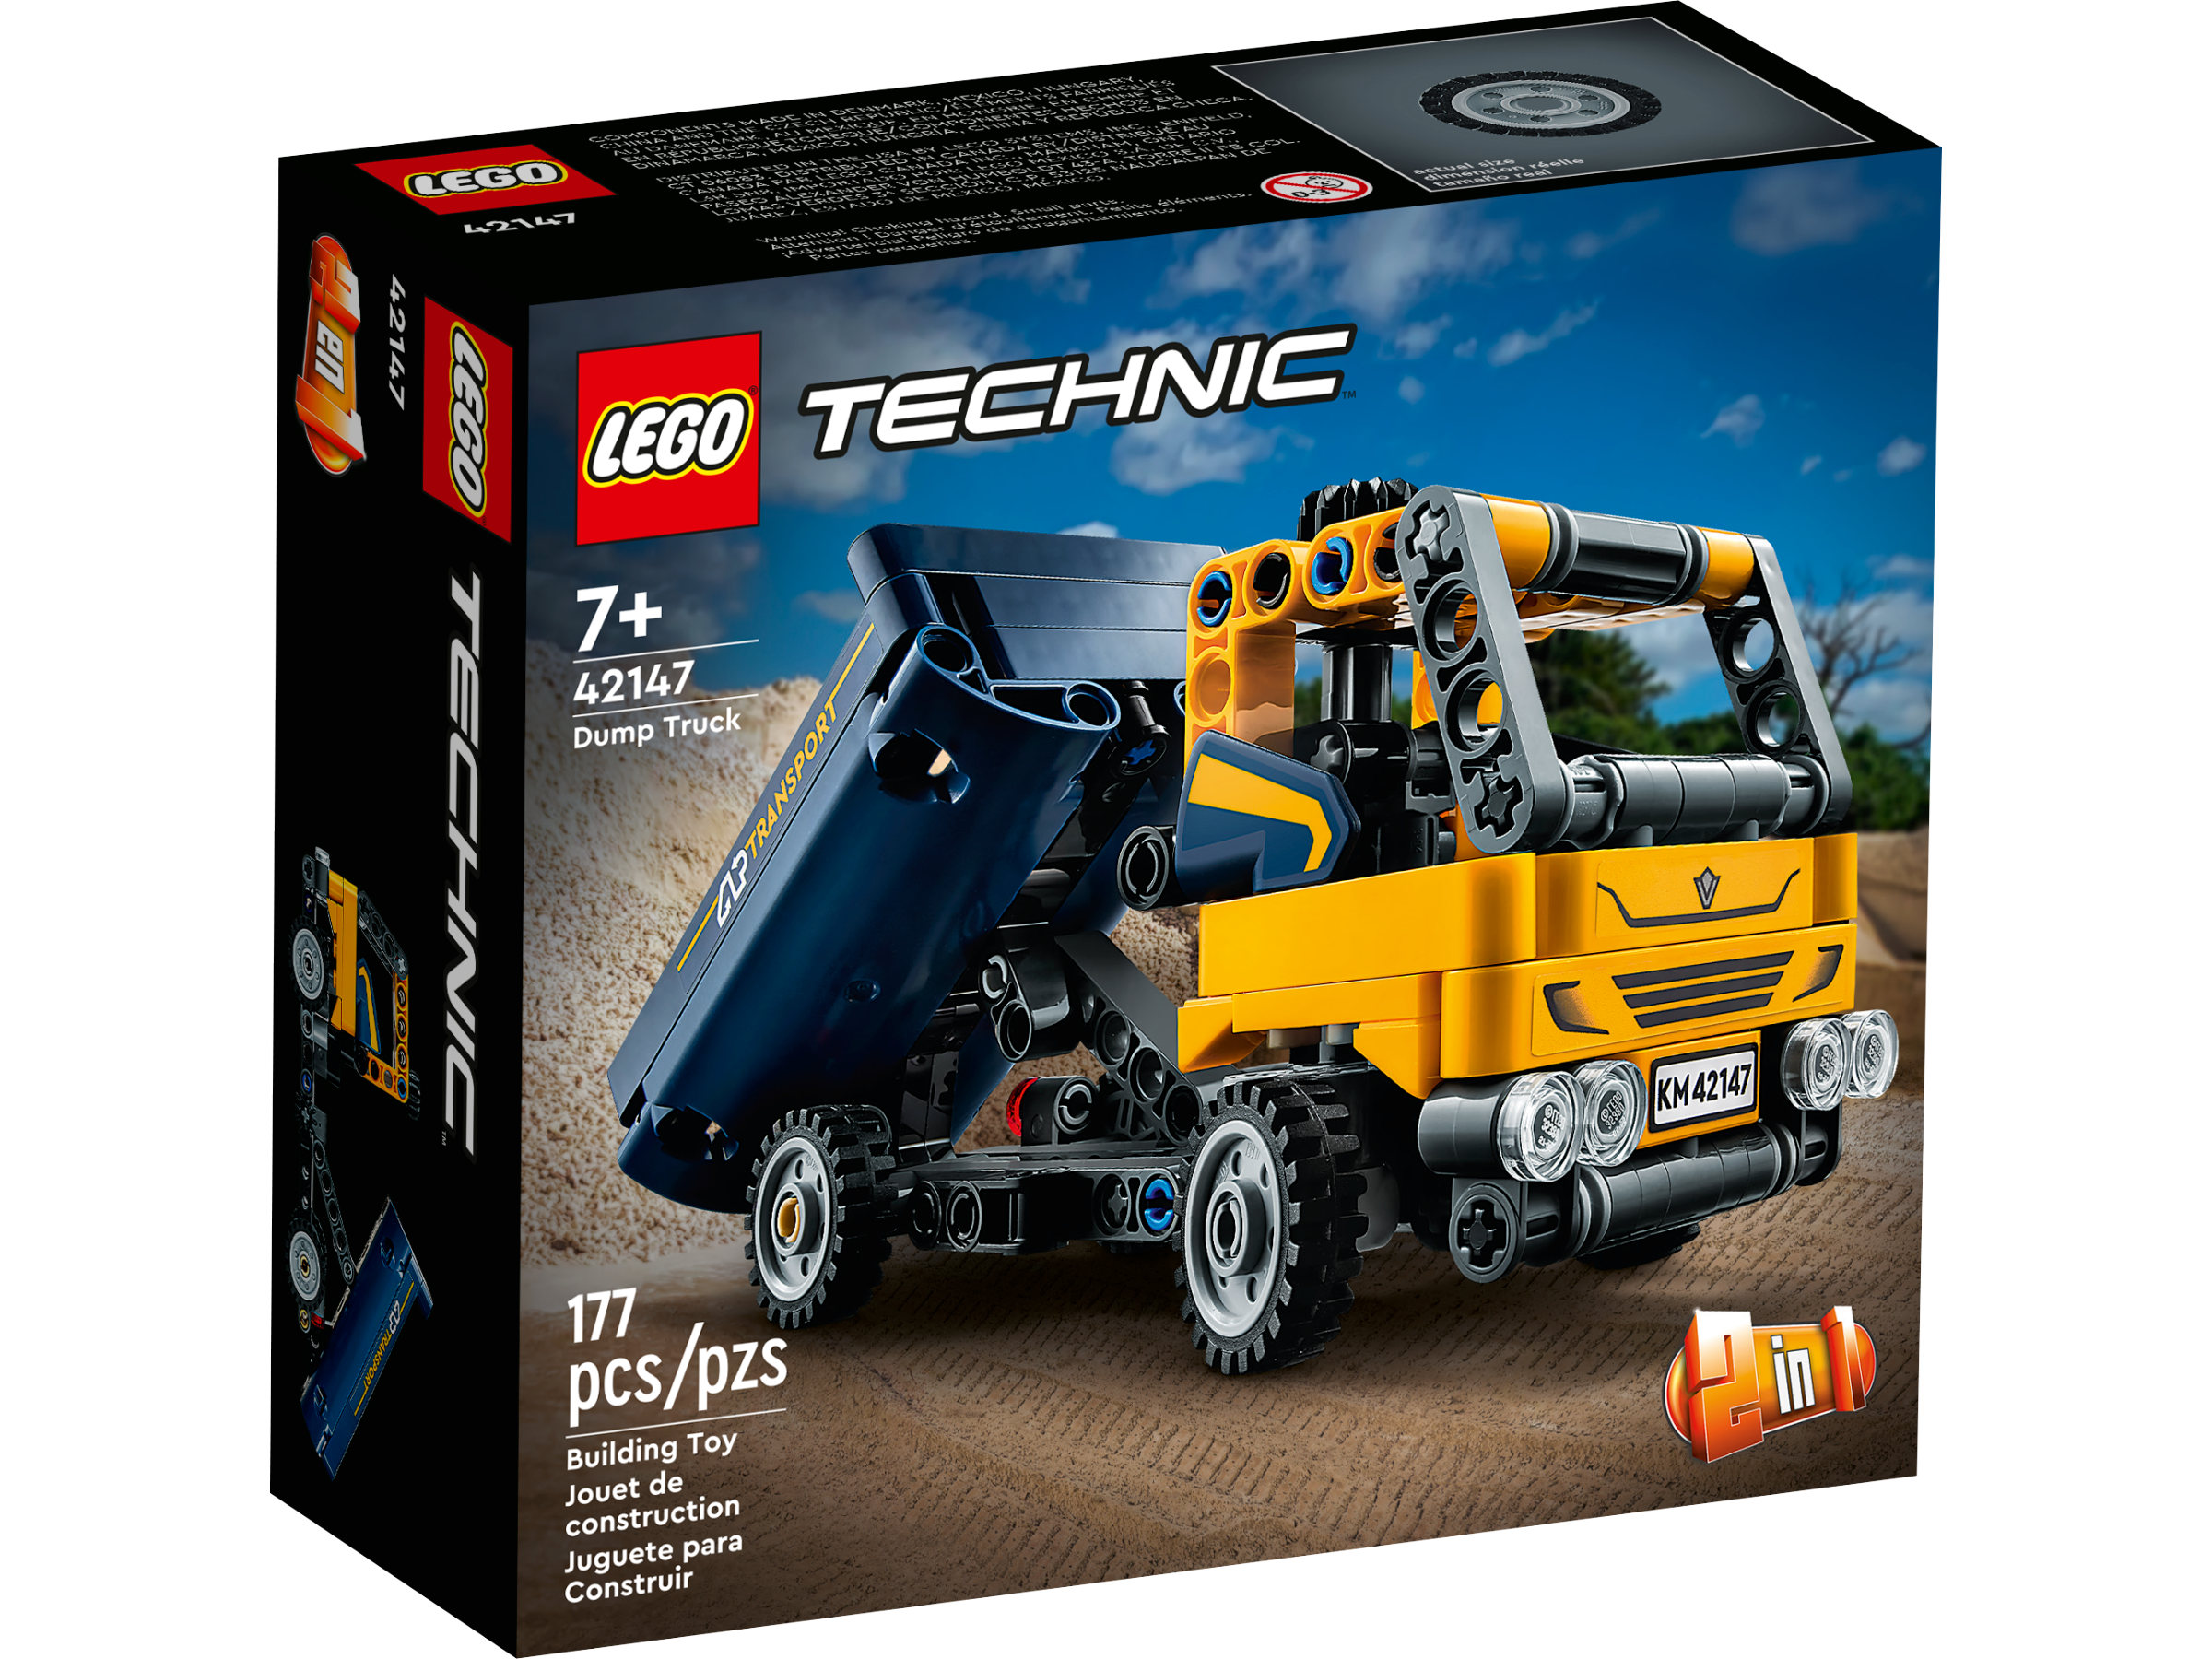 Elke week Charmant Trouwens Dump Truck 42147 | Technic™ | Buy online at the Official LEGO® Shop US